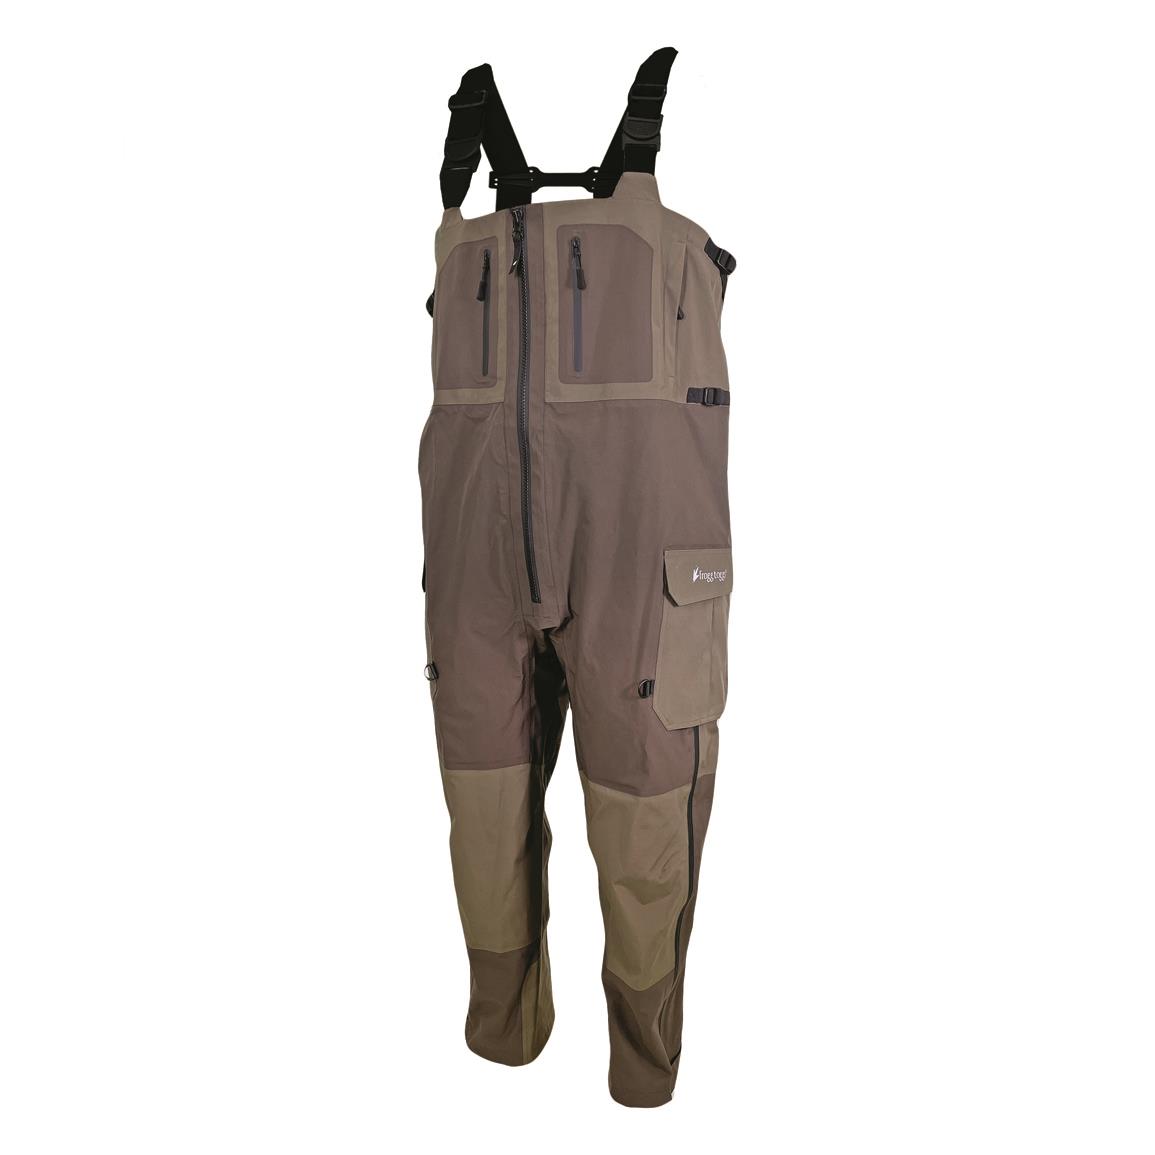 frogg toggs Men's Pilot 2 Guide Bibs, Stone/Taupe